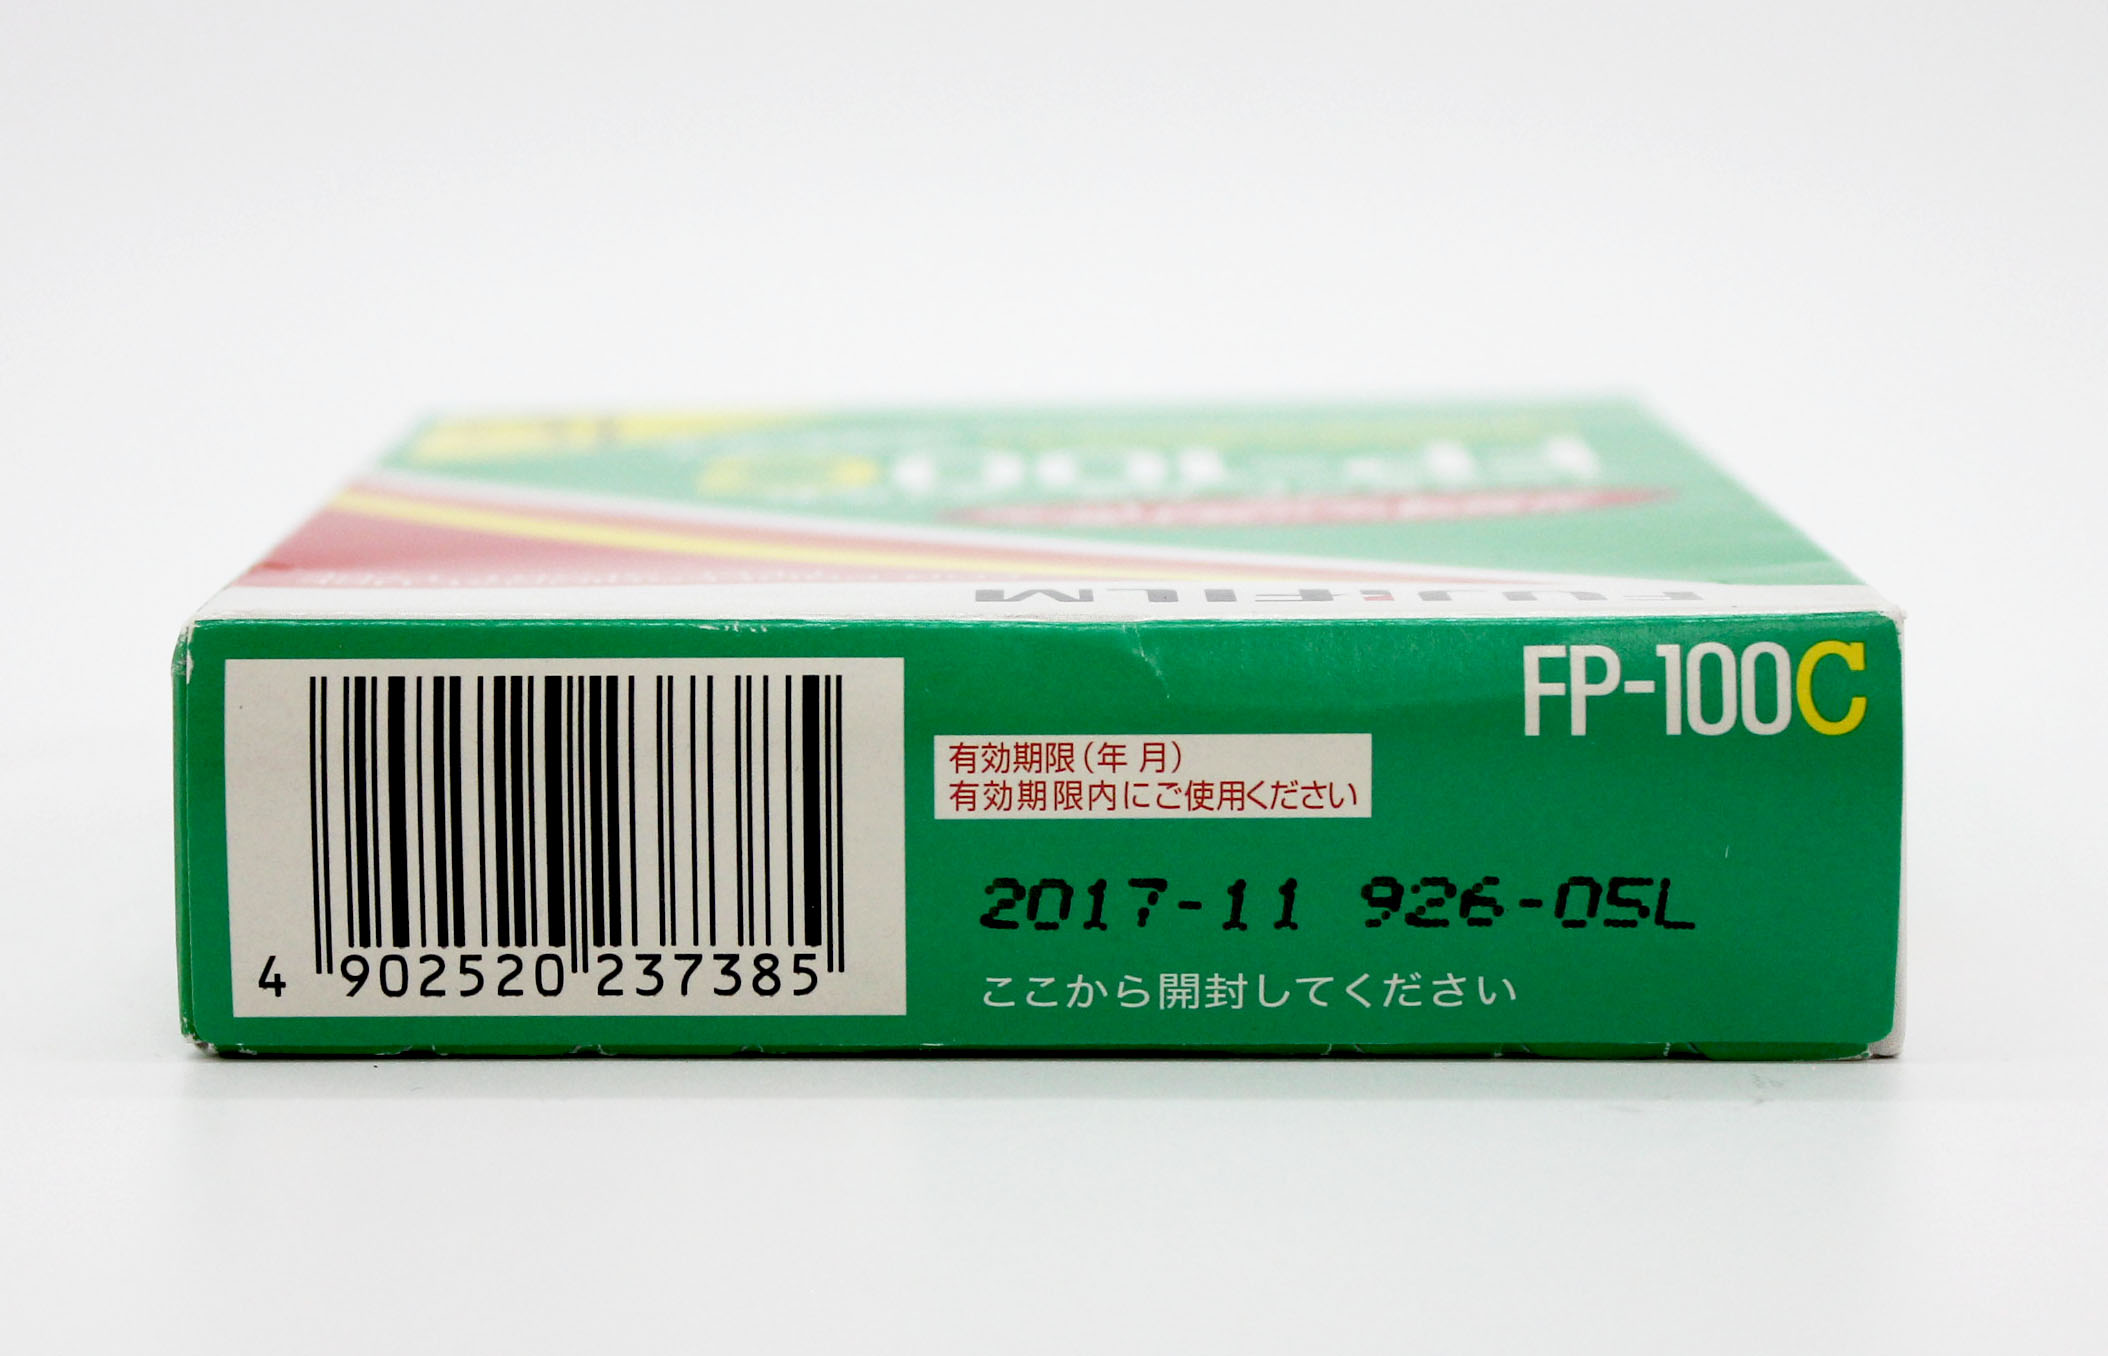  Fujifilm FP-100C Professional Instant Color Film Expired 11/2017 from Japan Photo 3